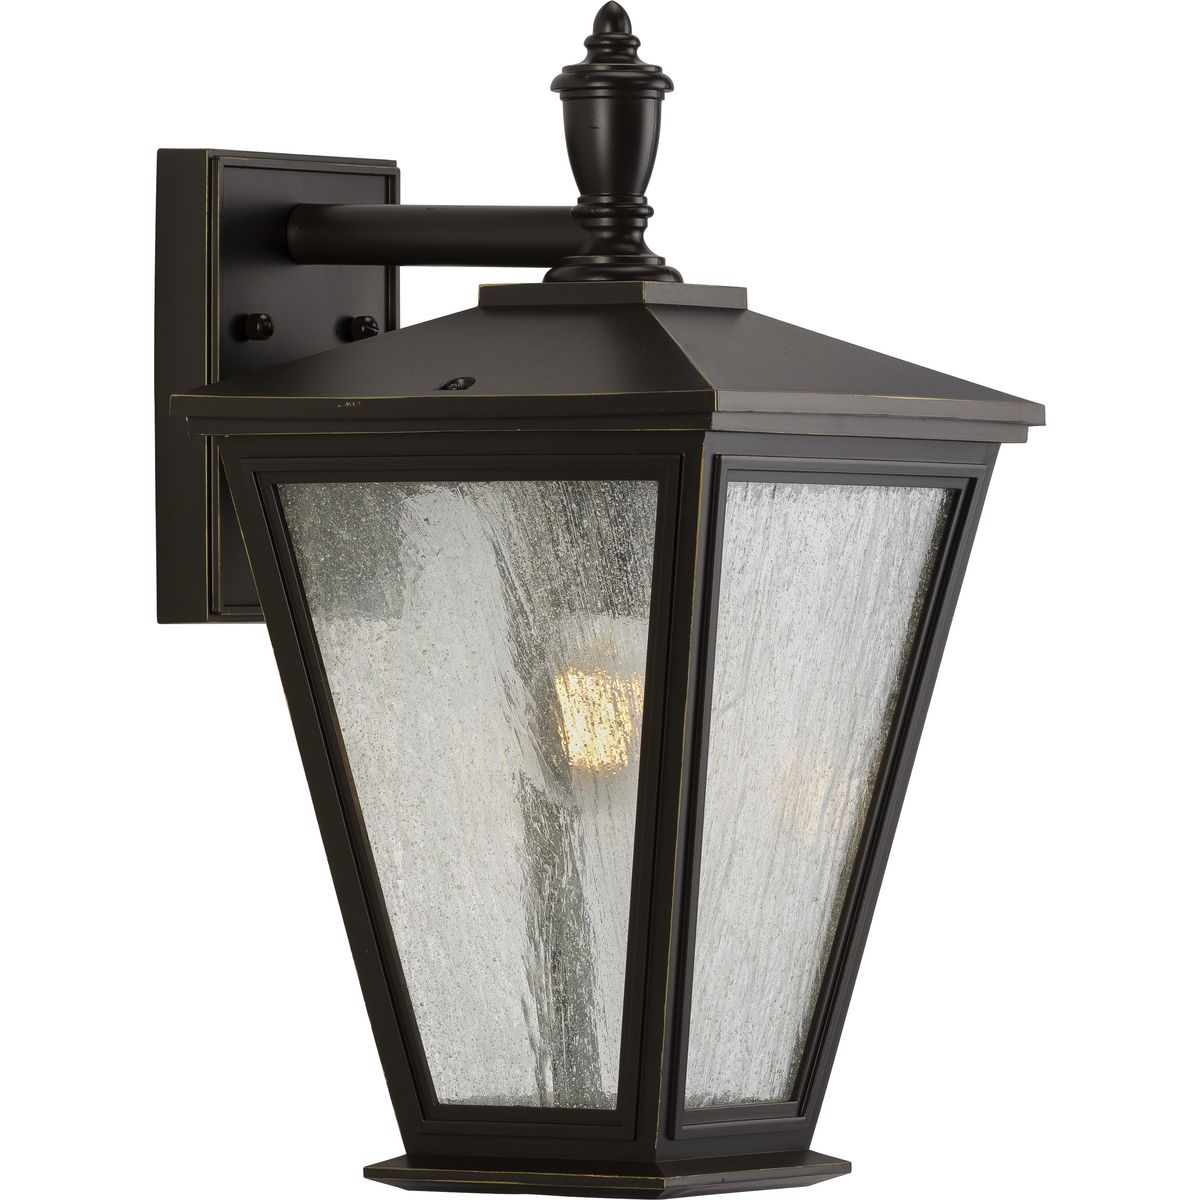 Cardiff Outdoor Wall Light